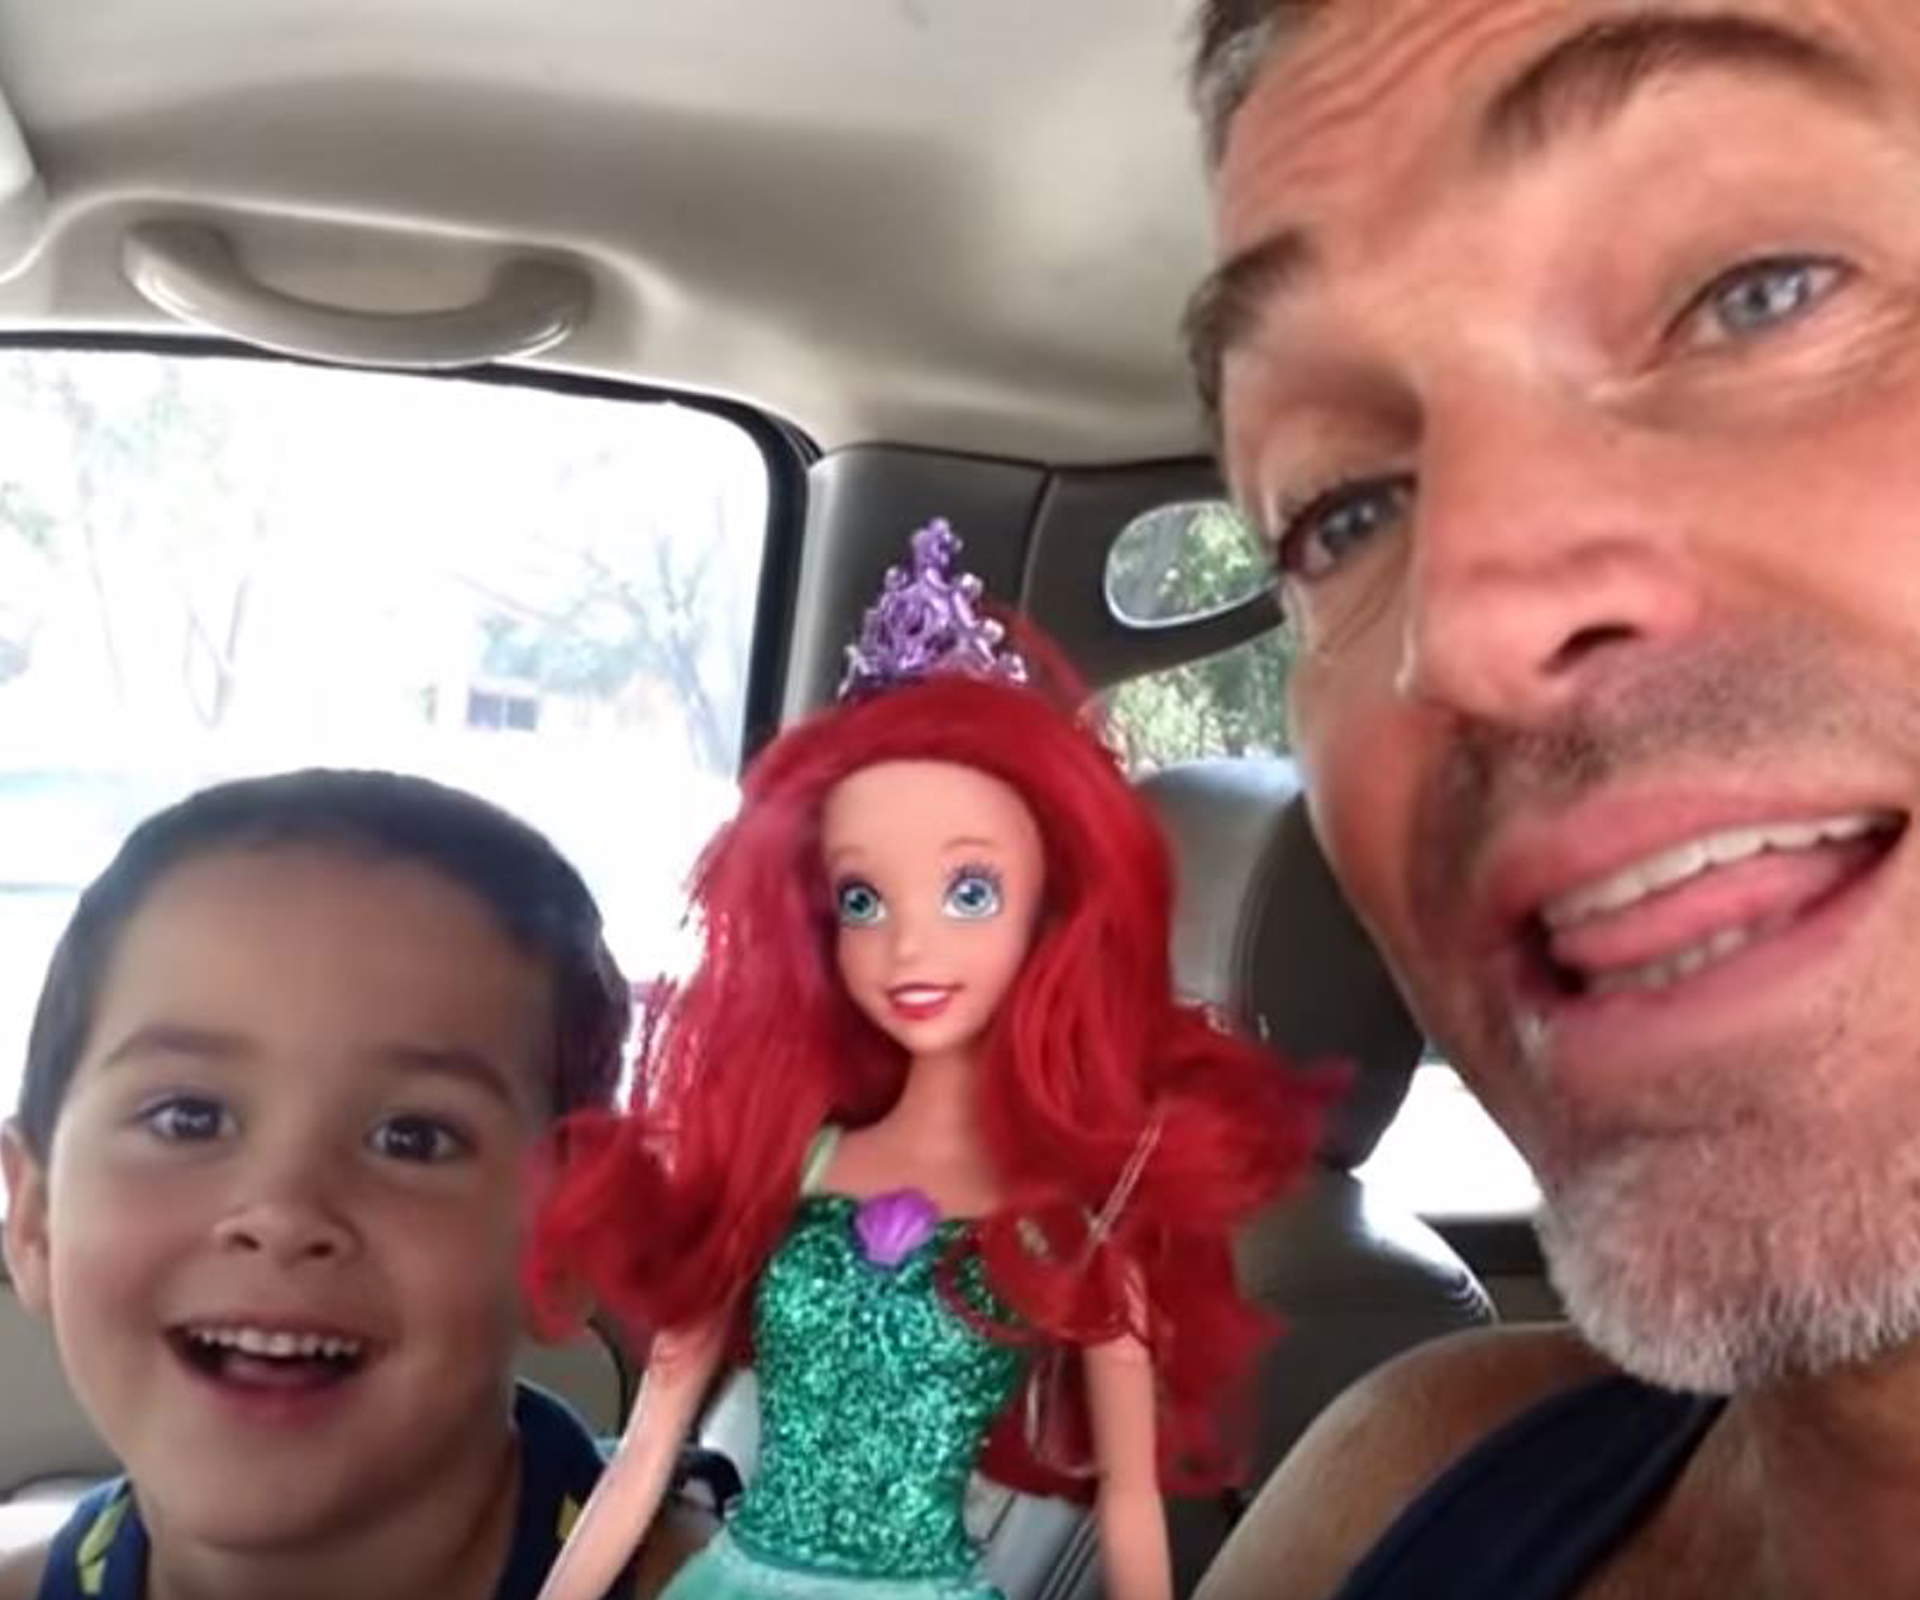 WATCH: Dad films support of son’s toy choice